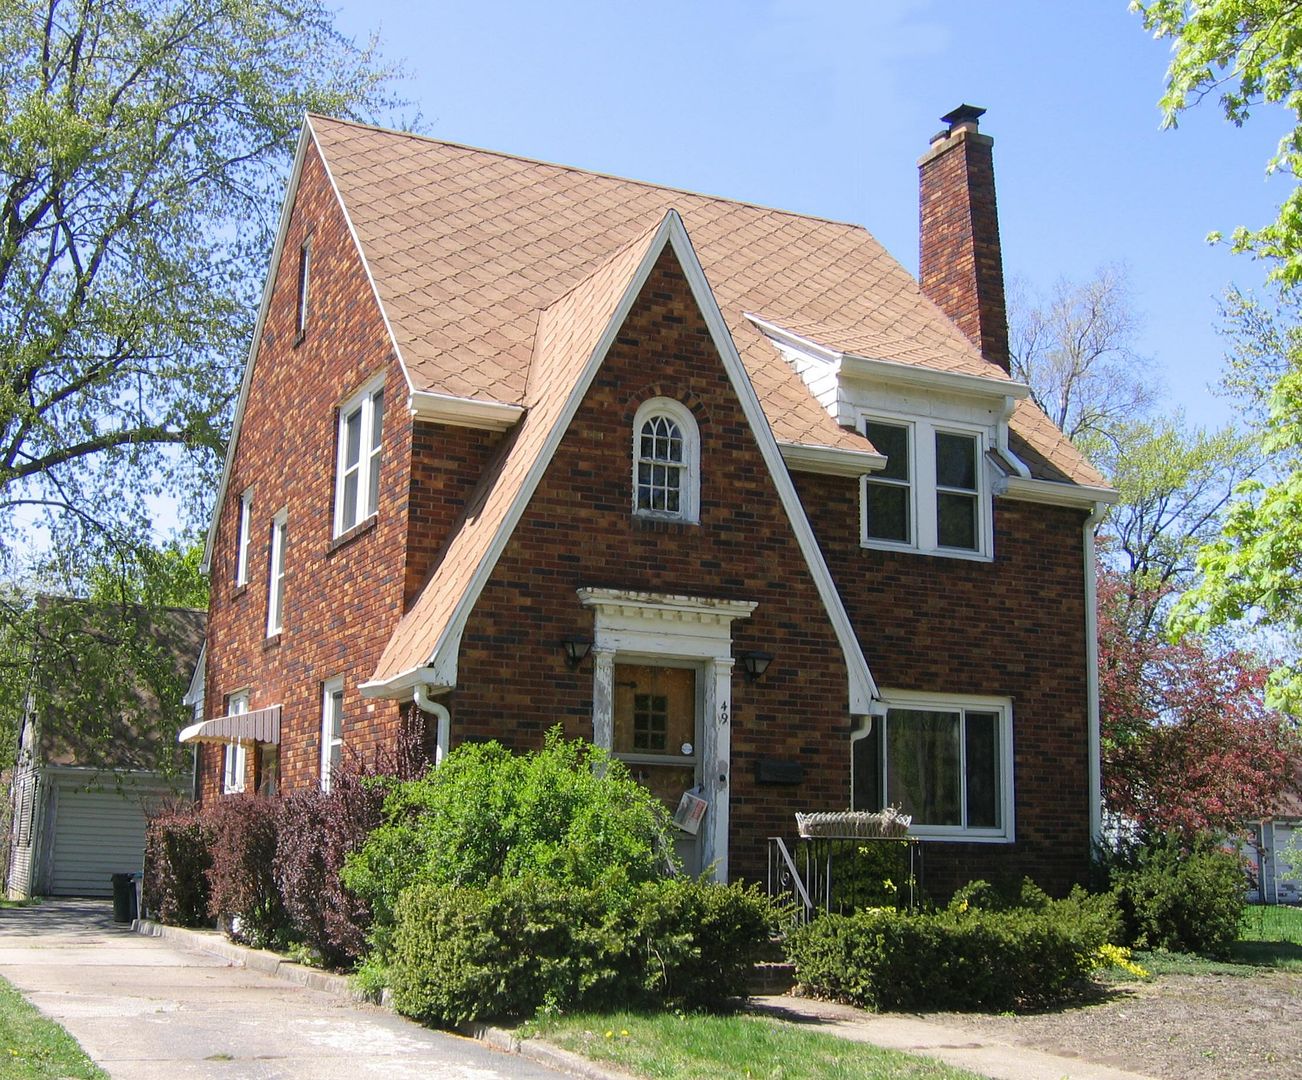 Dale Wolicki found the actual house featured in the Wardway brochure (shown above). 